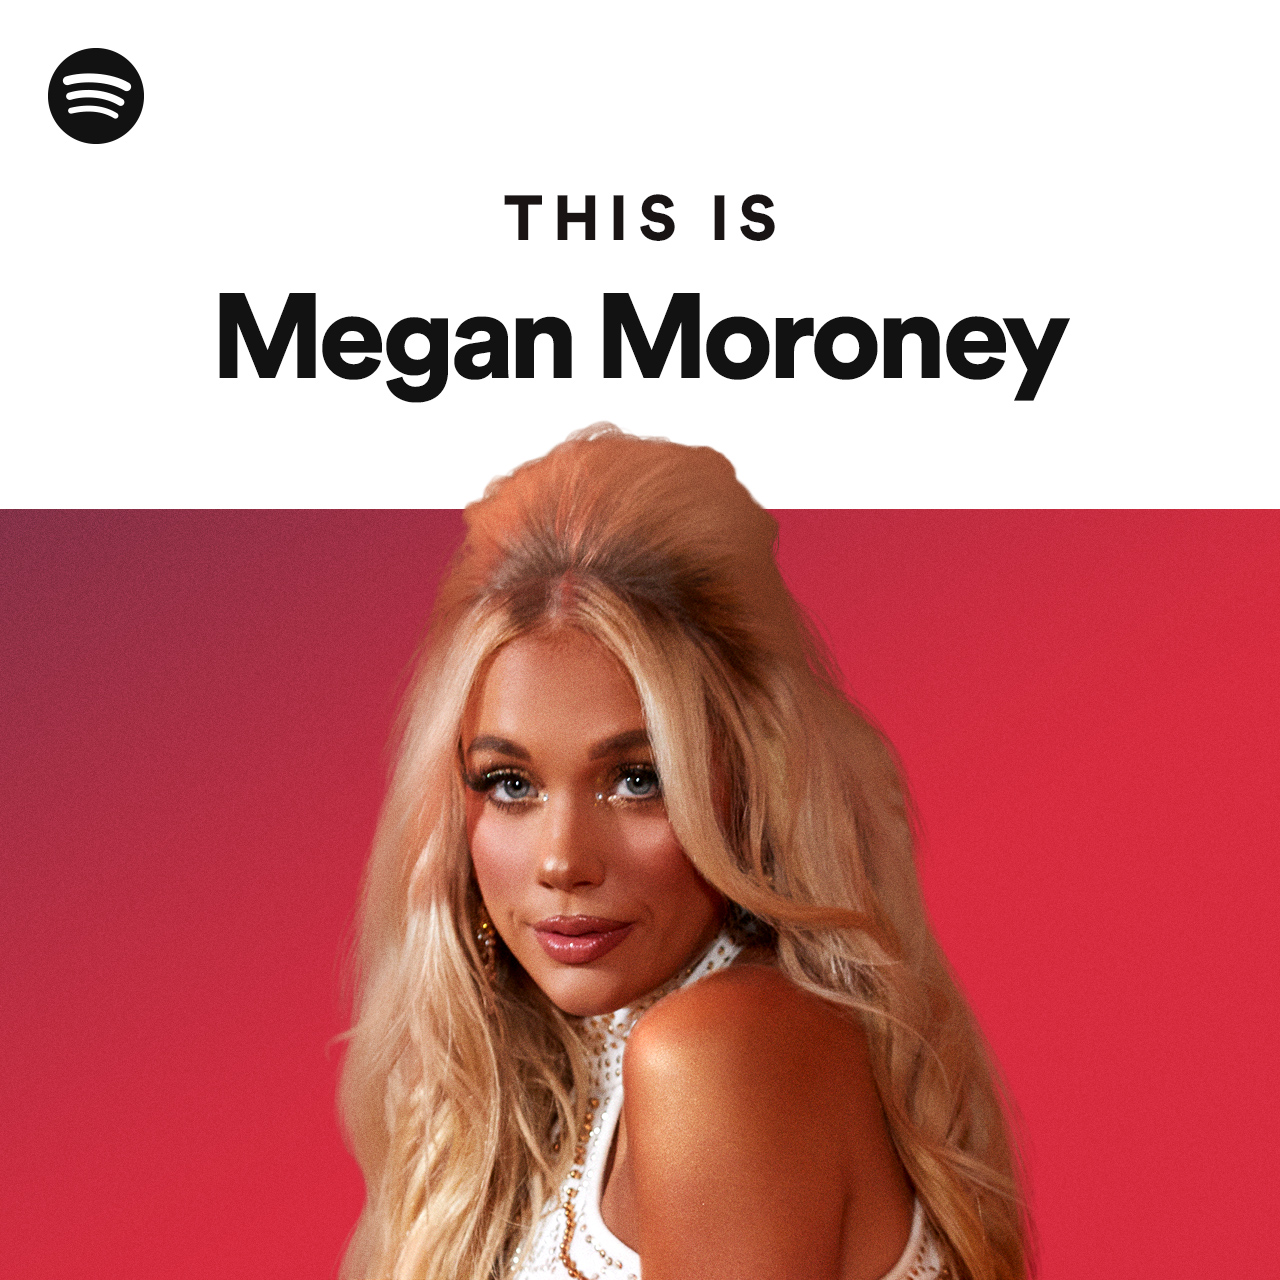 This Is Megan Moroney - playlist by Spotify | Spotify